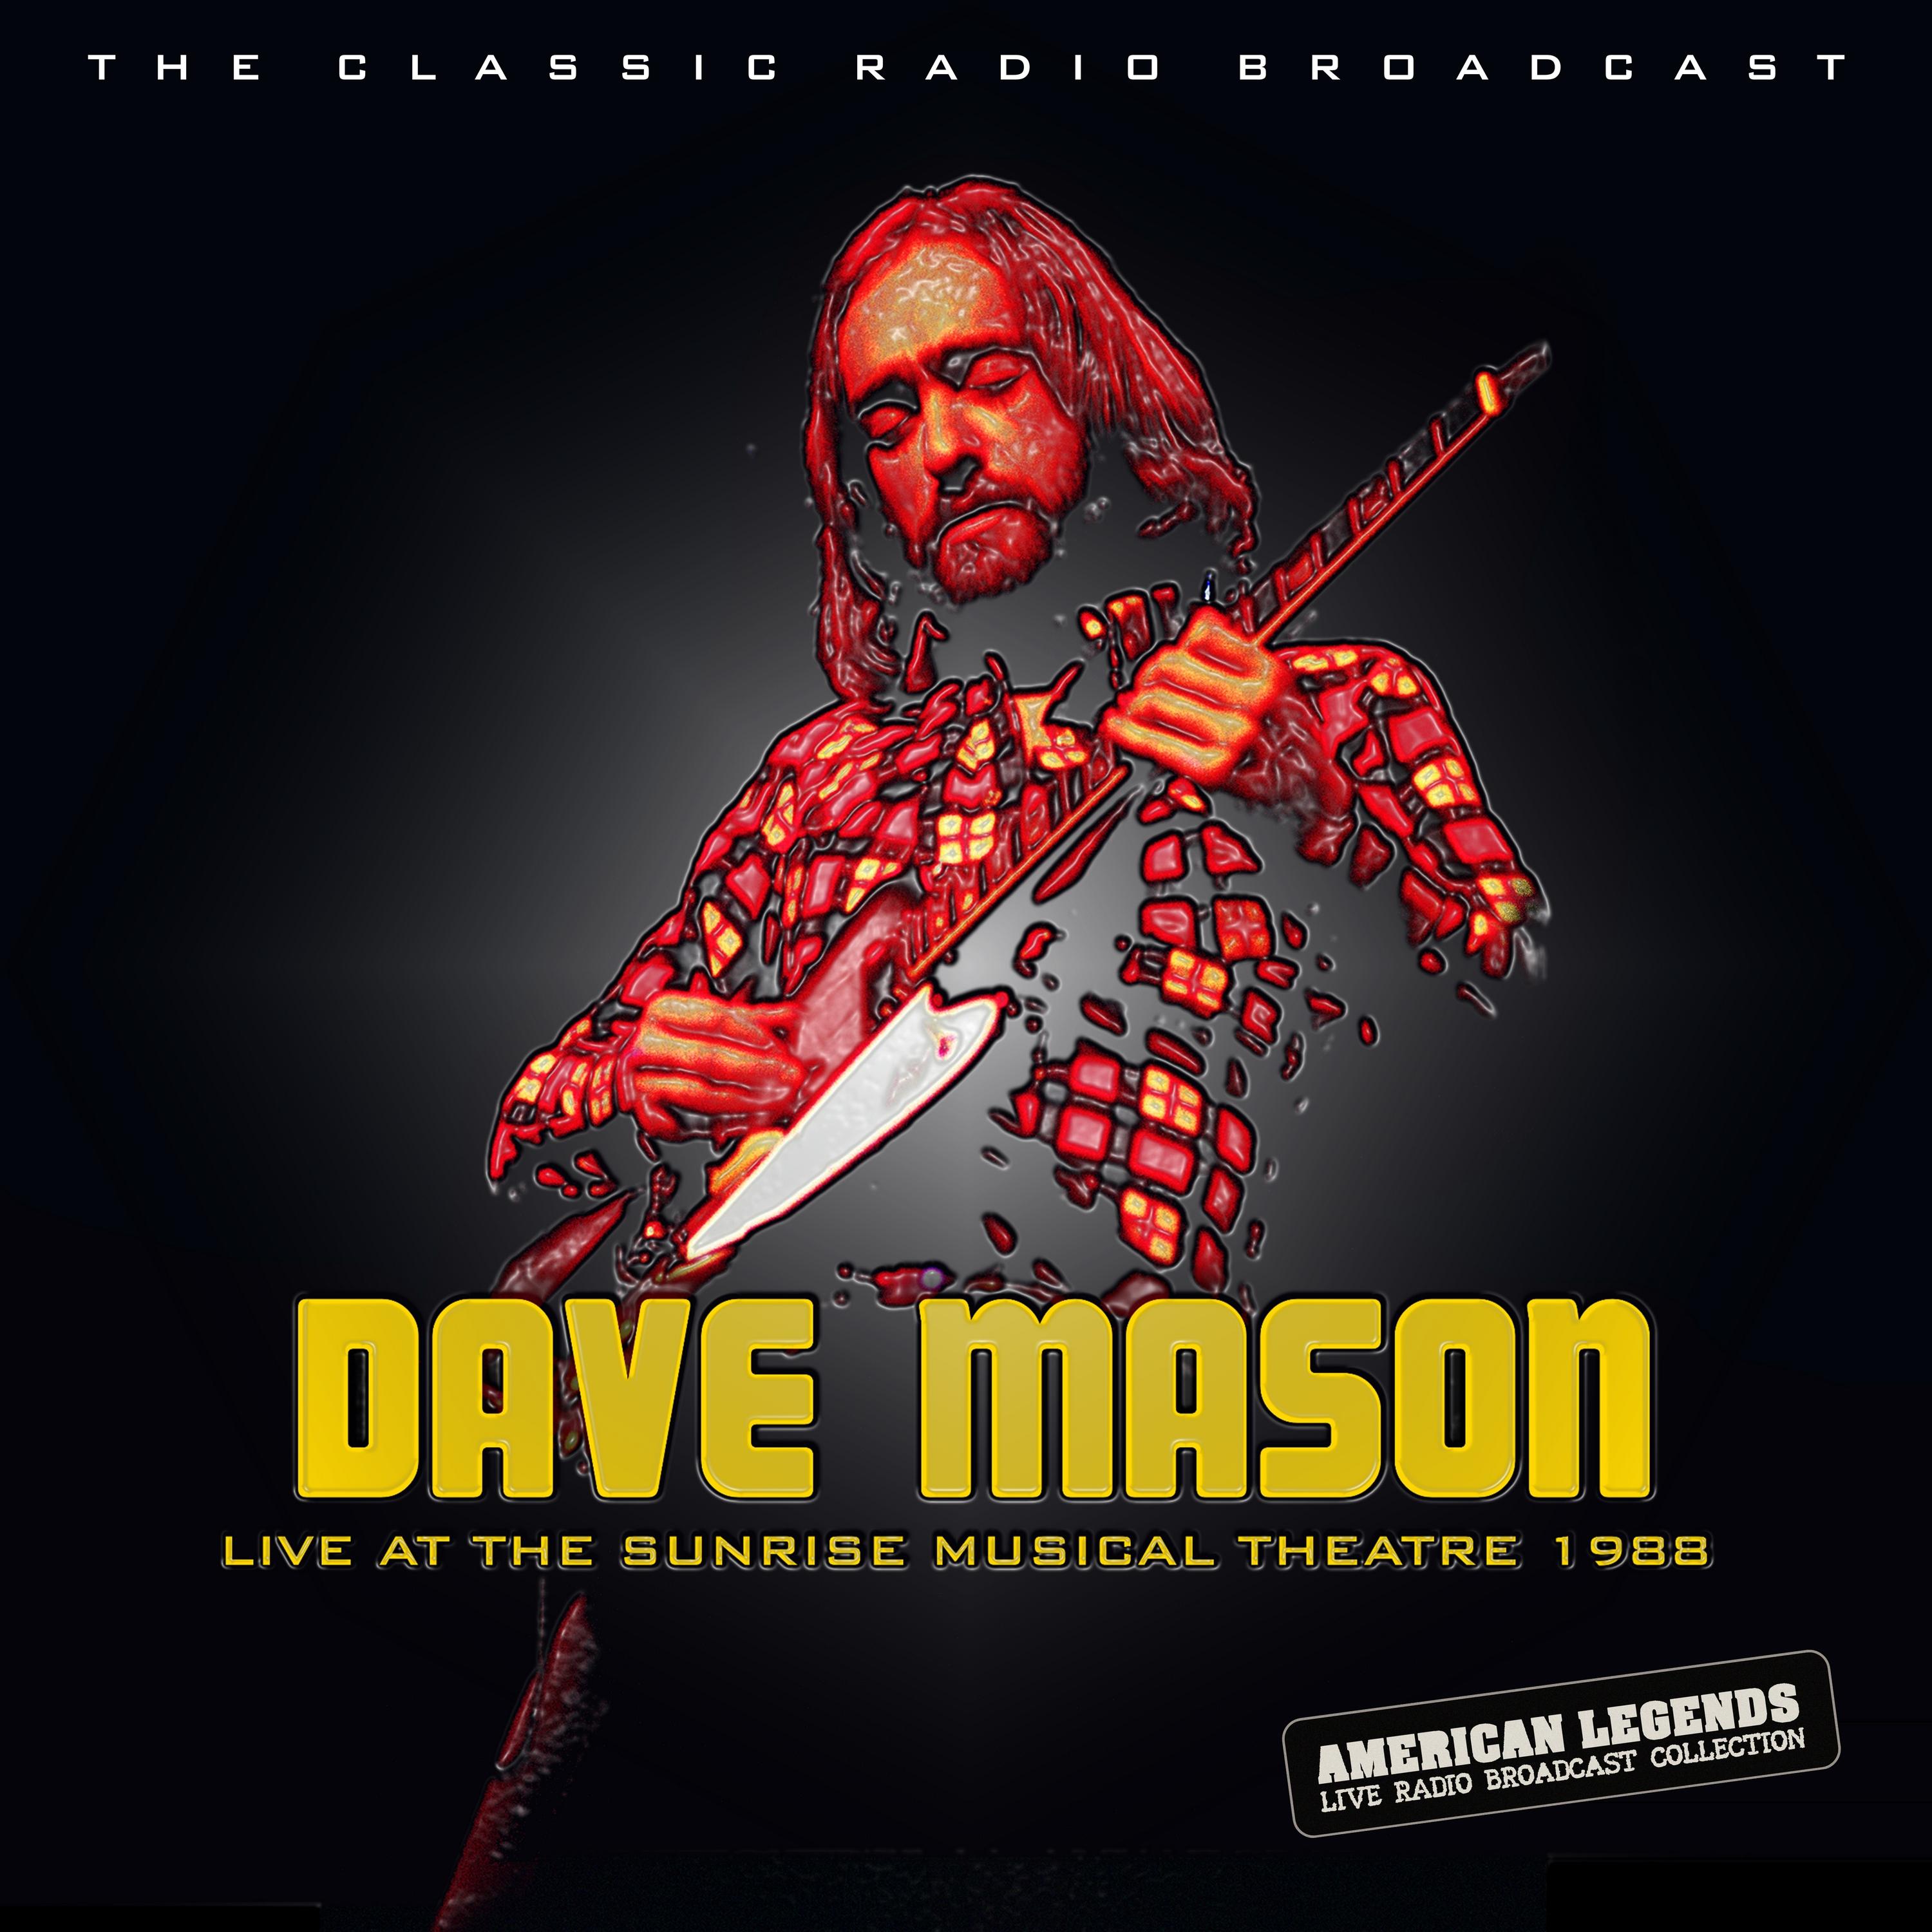 Dave Mason - All Along The Watchtower (Live)